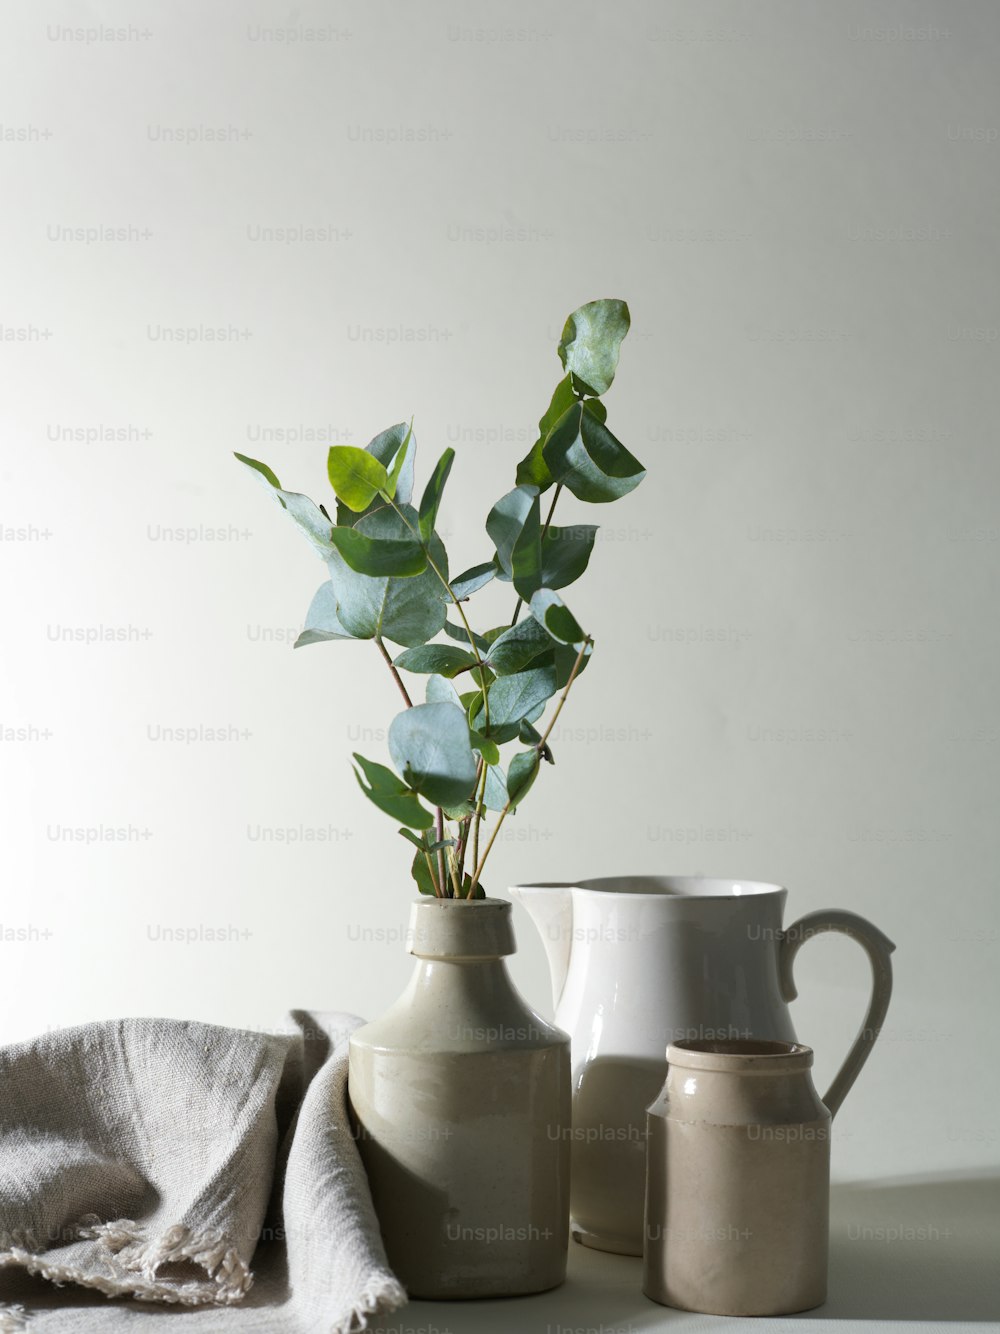 a white vase with a plant in it next to another vase with a plant in